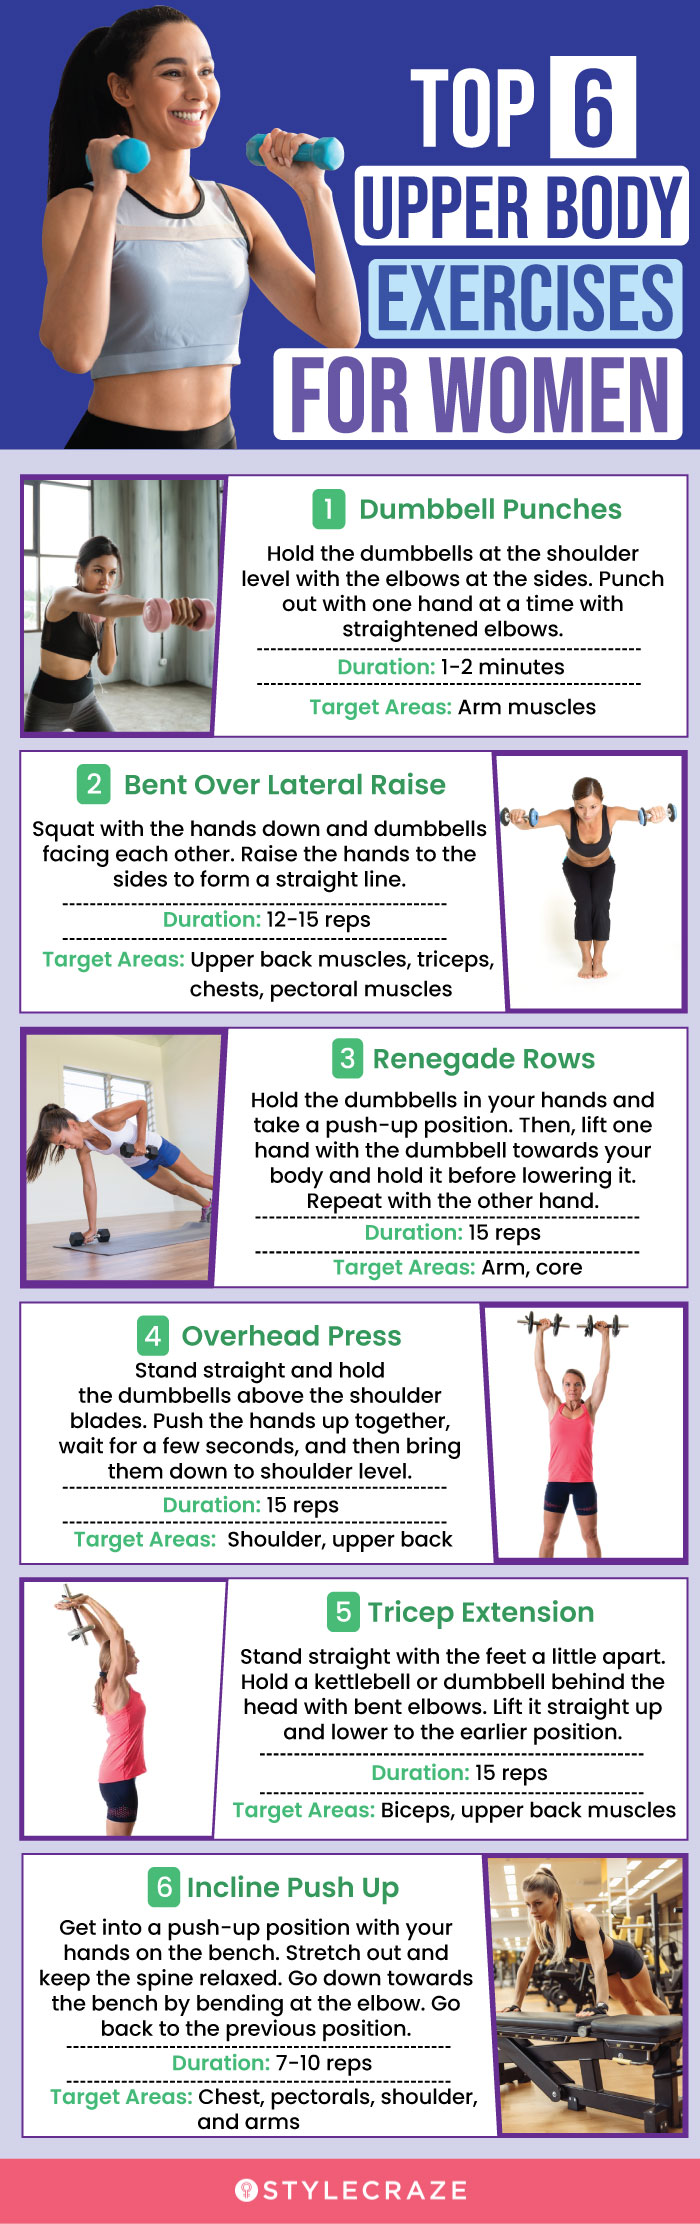 top 6 upper body exercises for women (infographic)